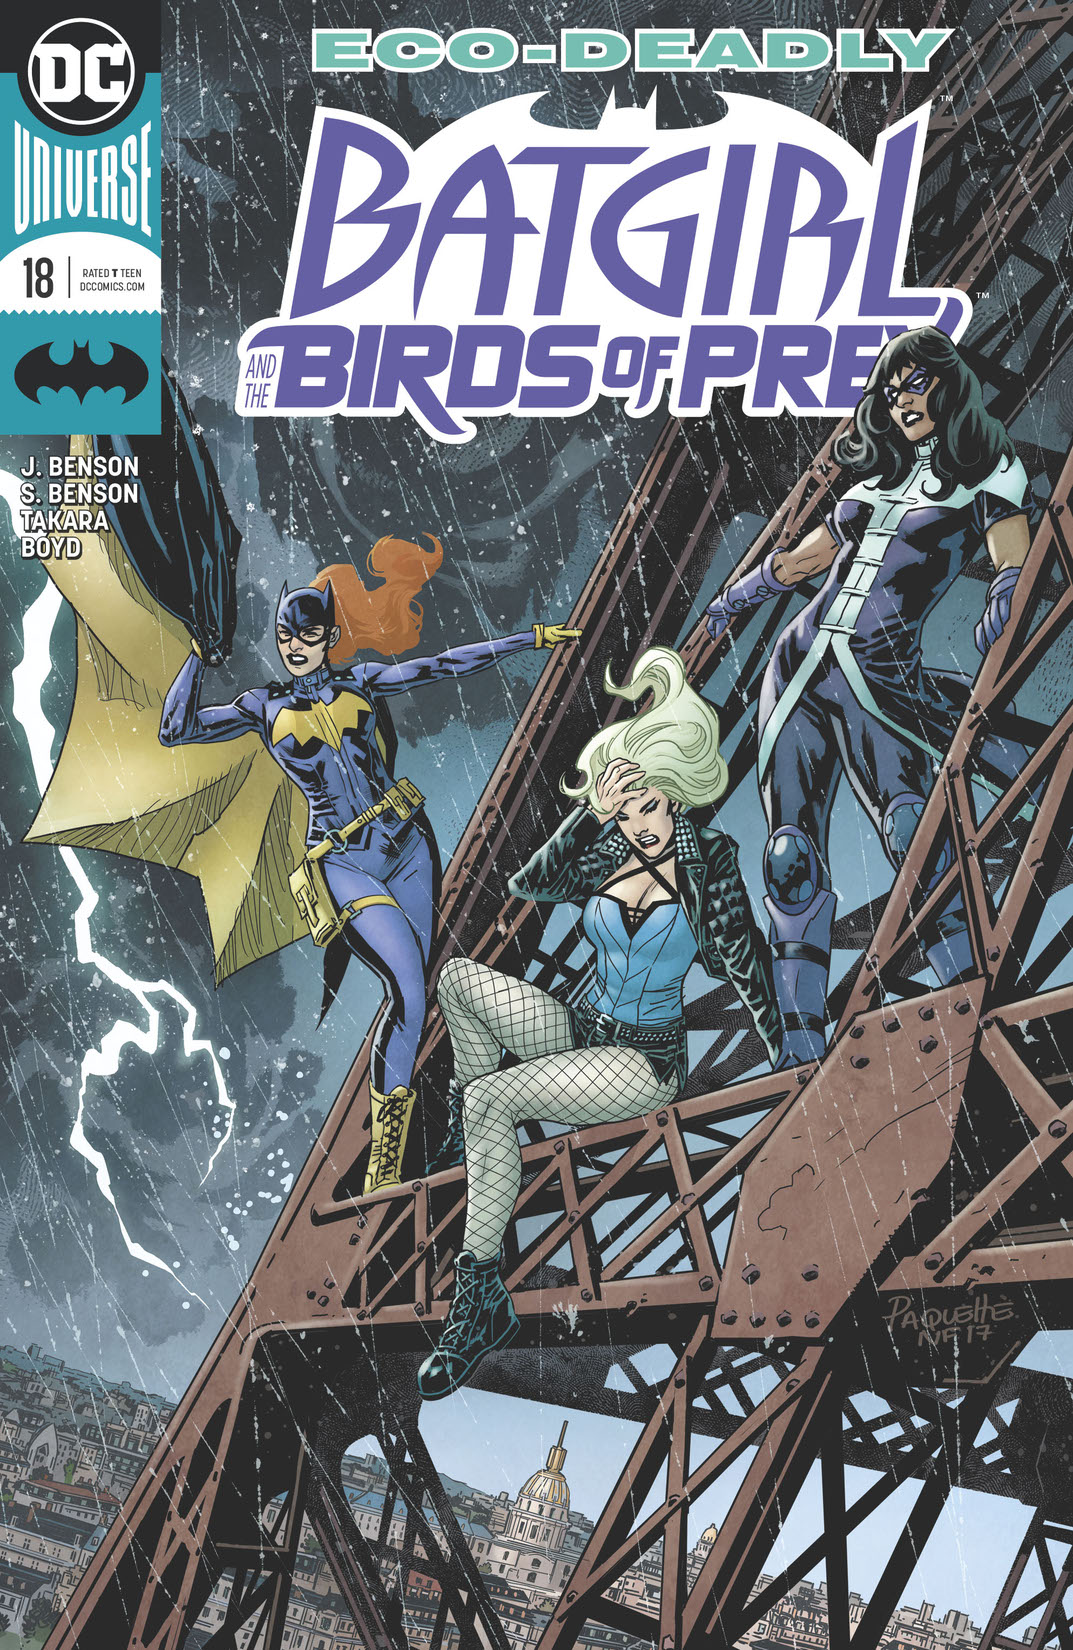 Batgirl and the Birds of Prey #18 preview images